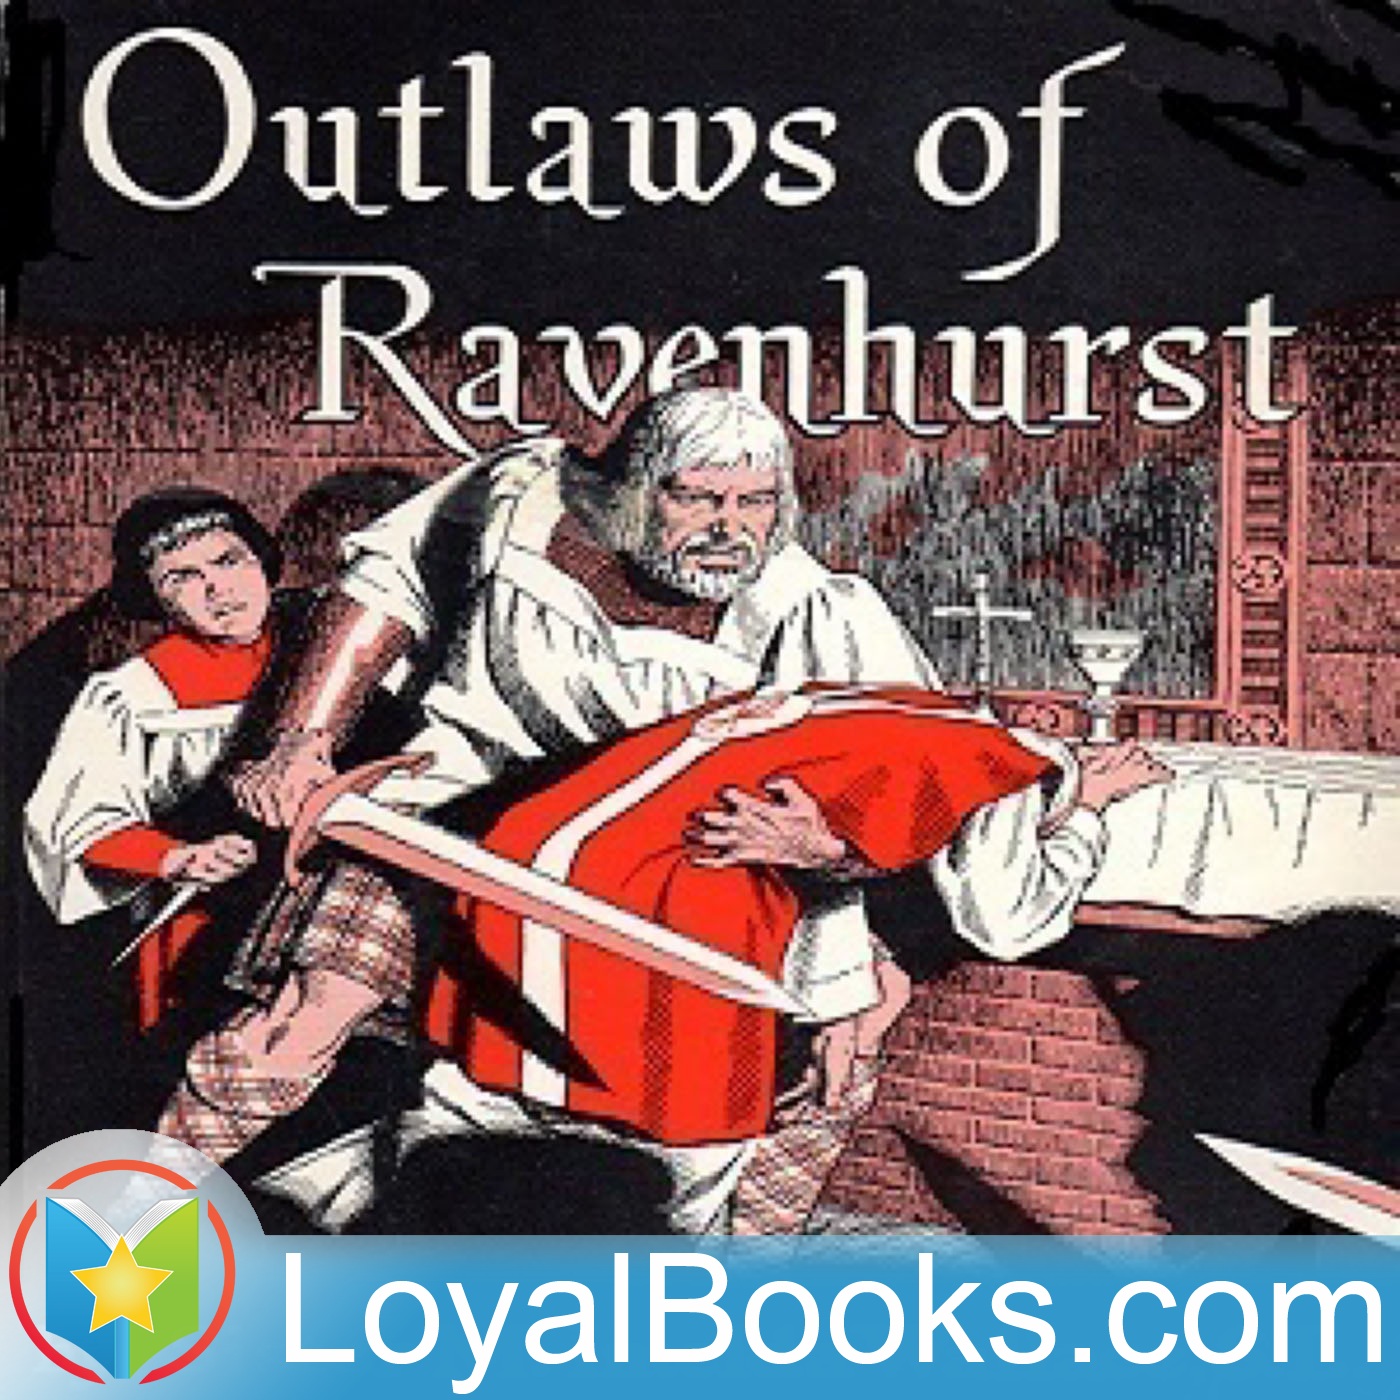 Outlaws of Ravenhurst by Sister M. Imelda Wallace, S.L.